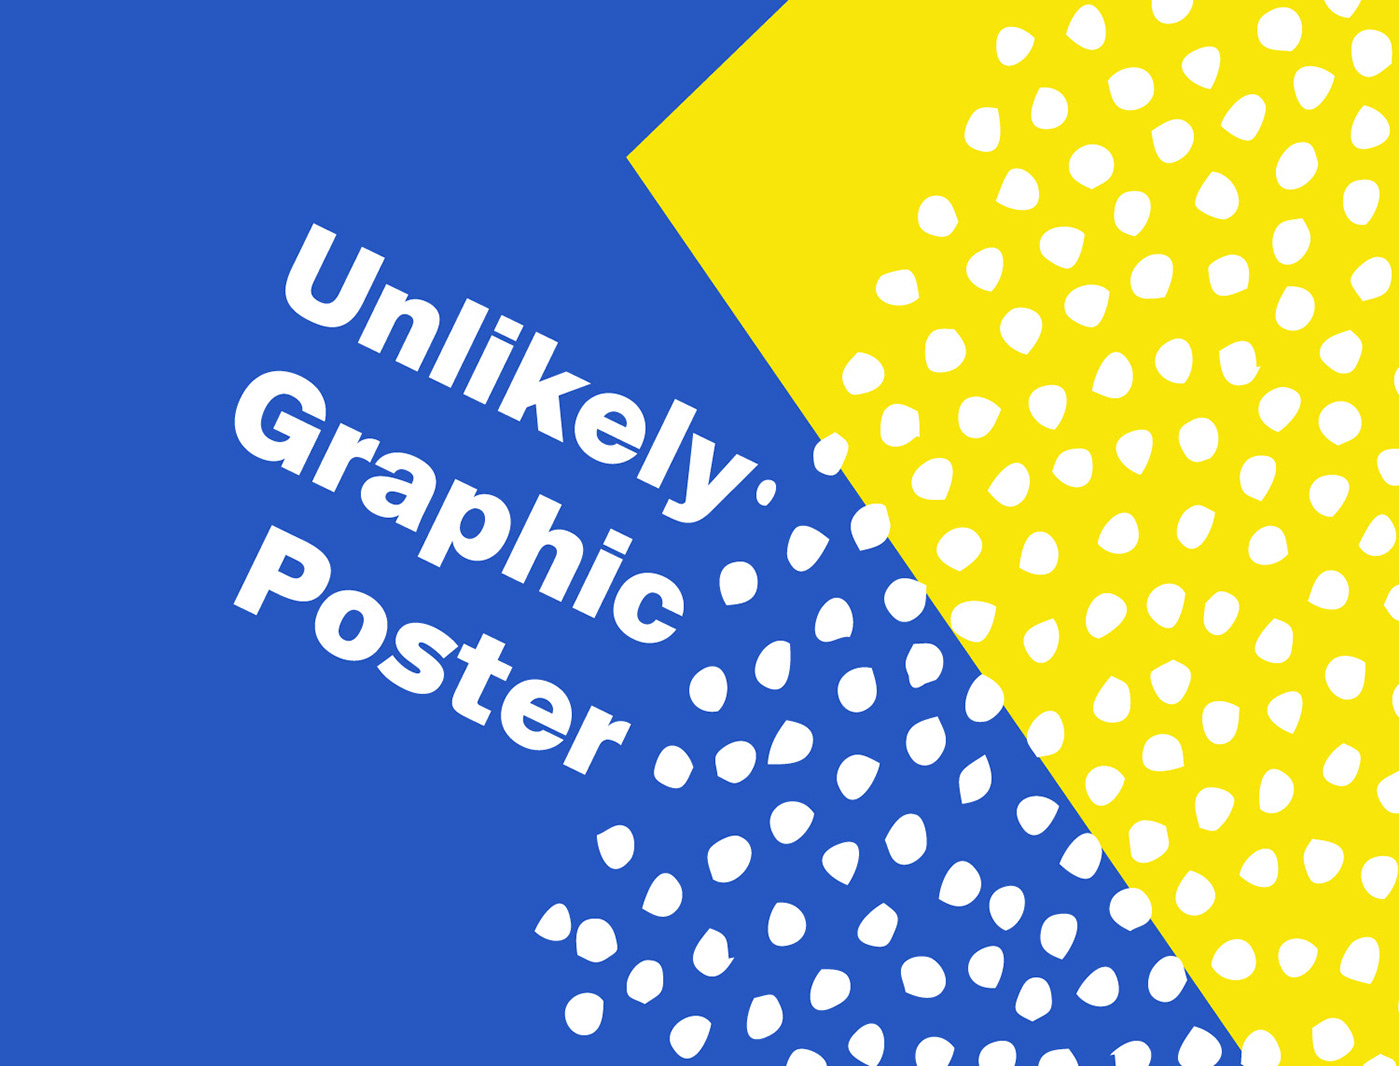 Unlikely Graphic Poster poster Poster Design ESAD esad.cr